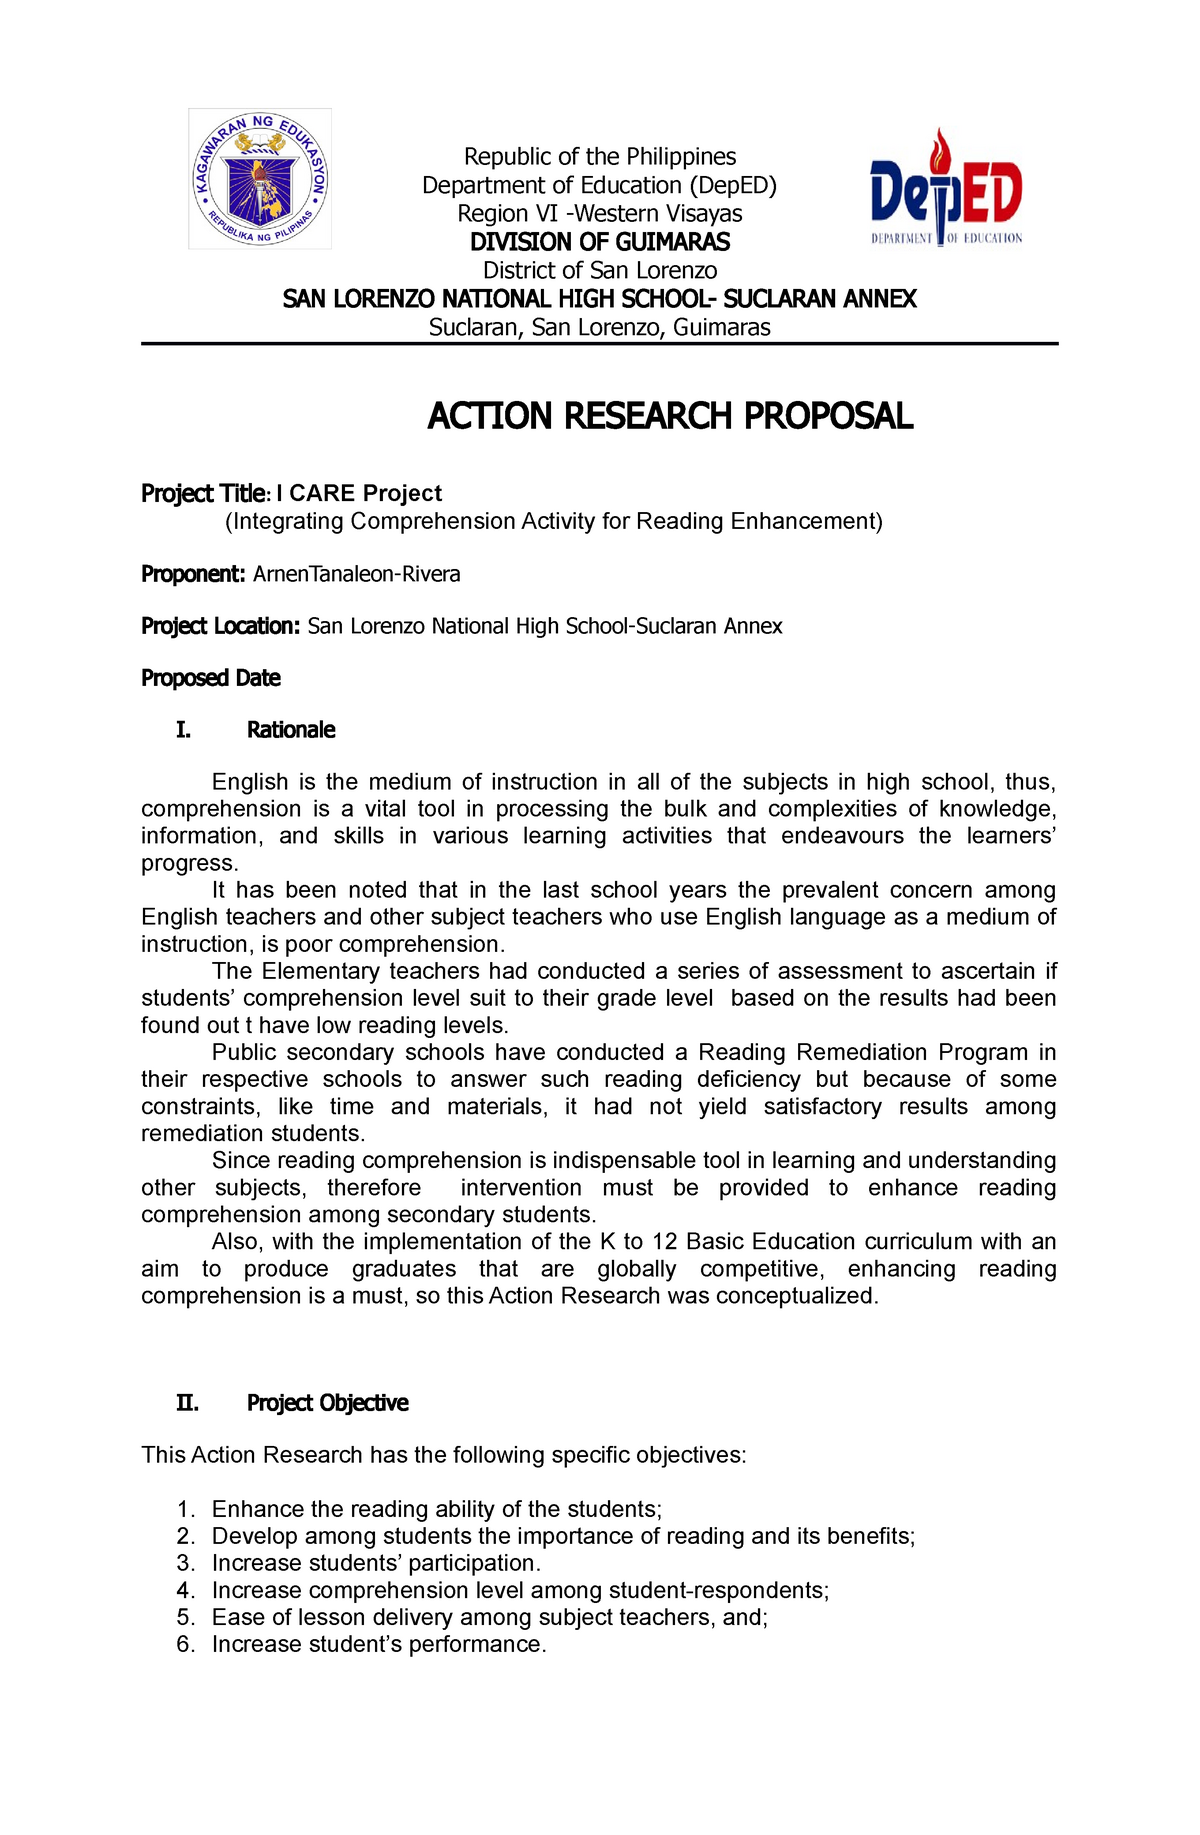 sample action research proposal in filipino